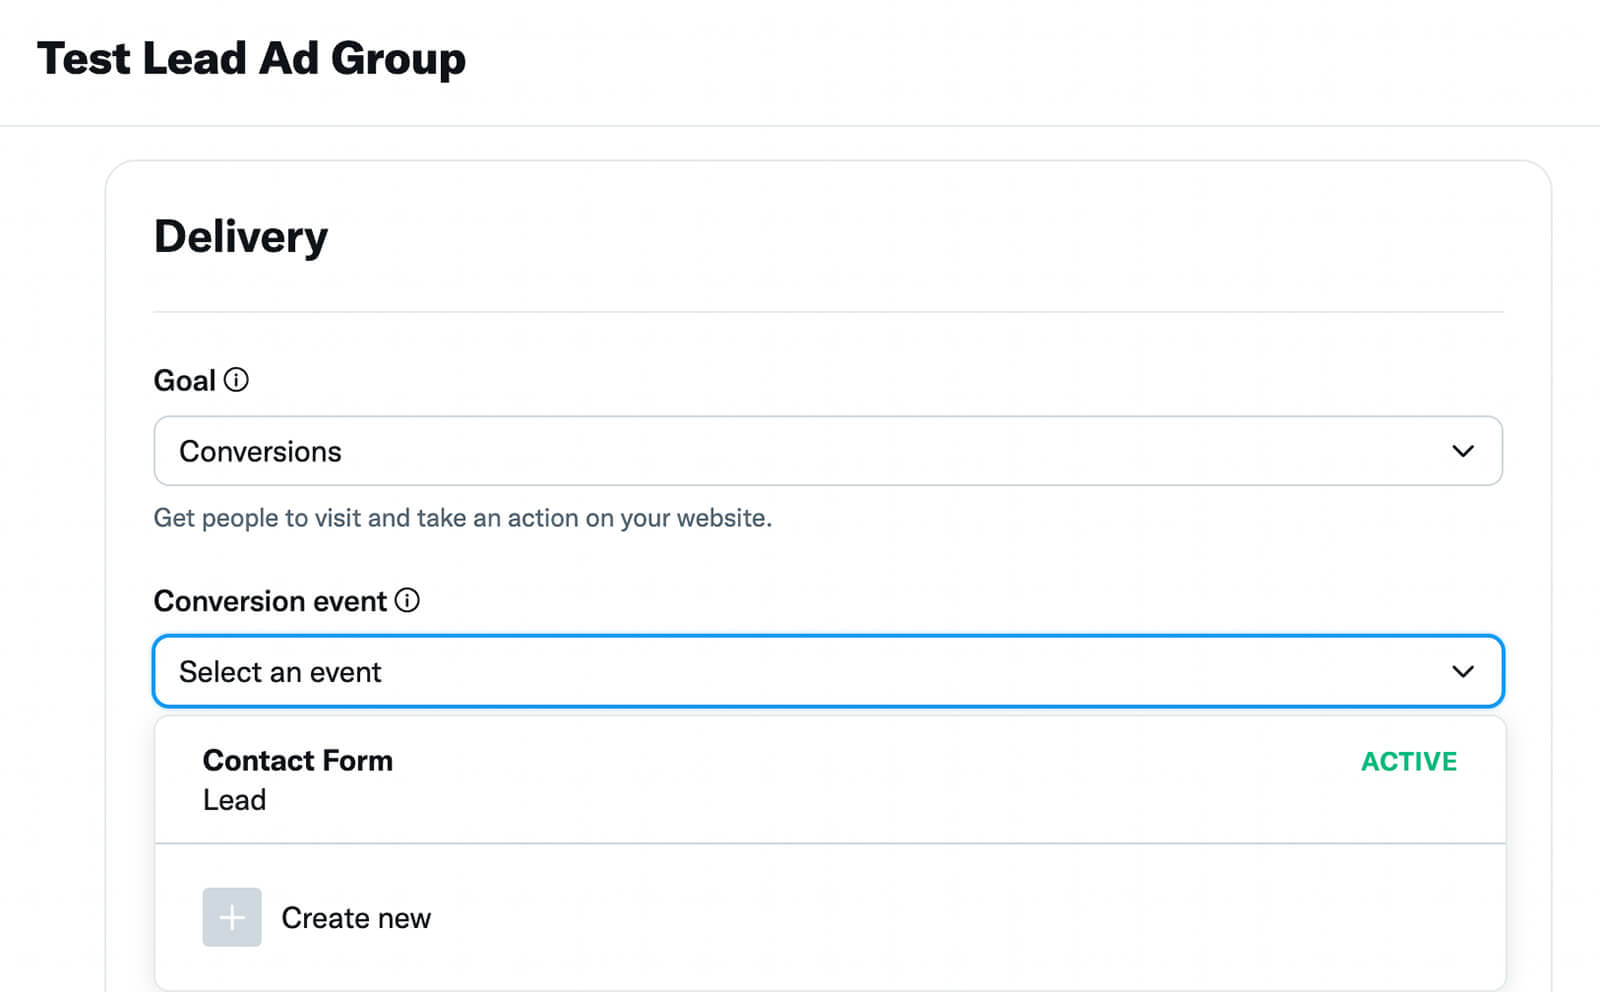 how-to-choose-a-campaign-objective-and-an-ad-group-goal-using-twitter-pixel-target-middle-lower-funnel-conversions-set-up-different-goal-test-lead-ad-group-conversion-event-example-19